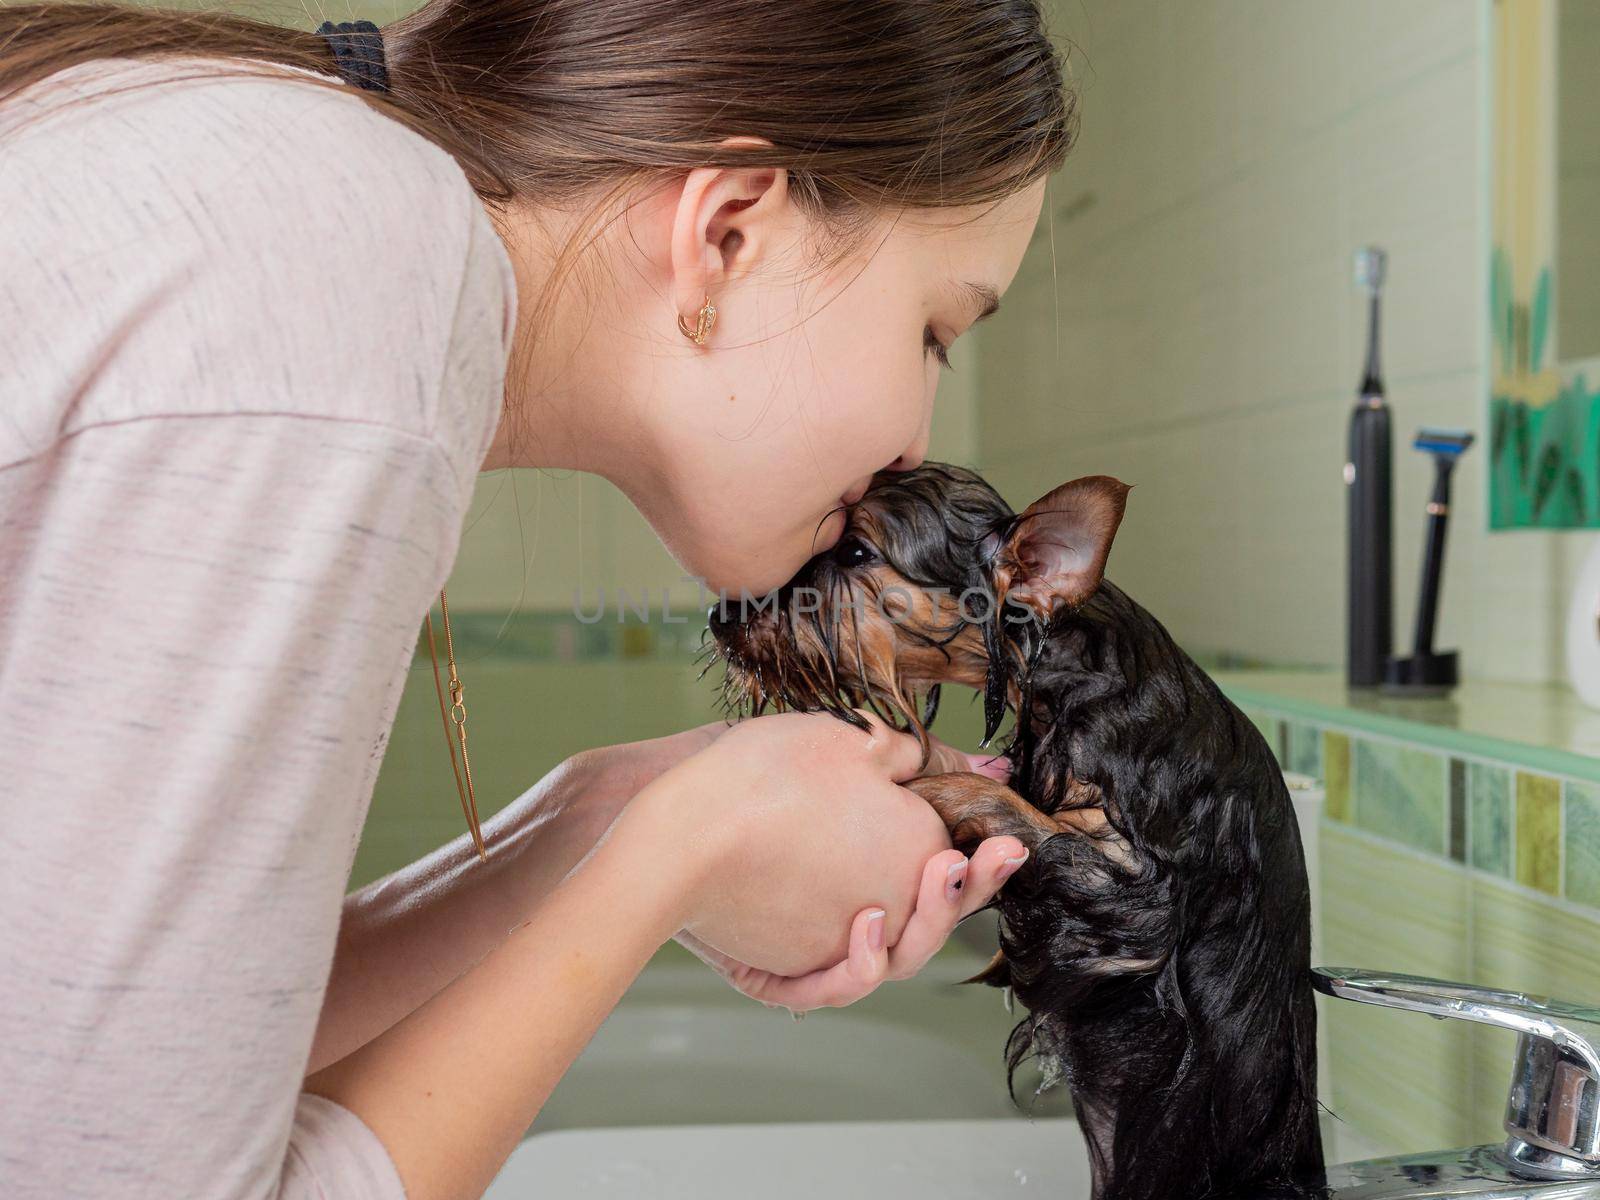 Bathing a little york puppy at home. The owner's love for his pet.